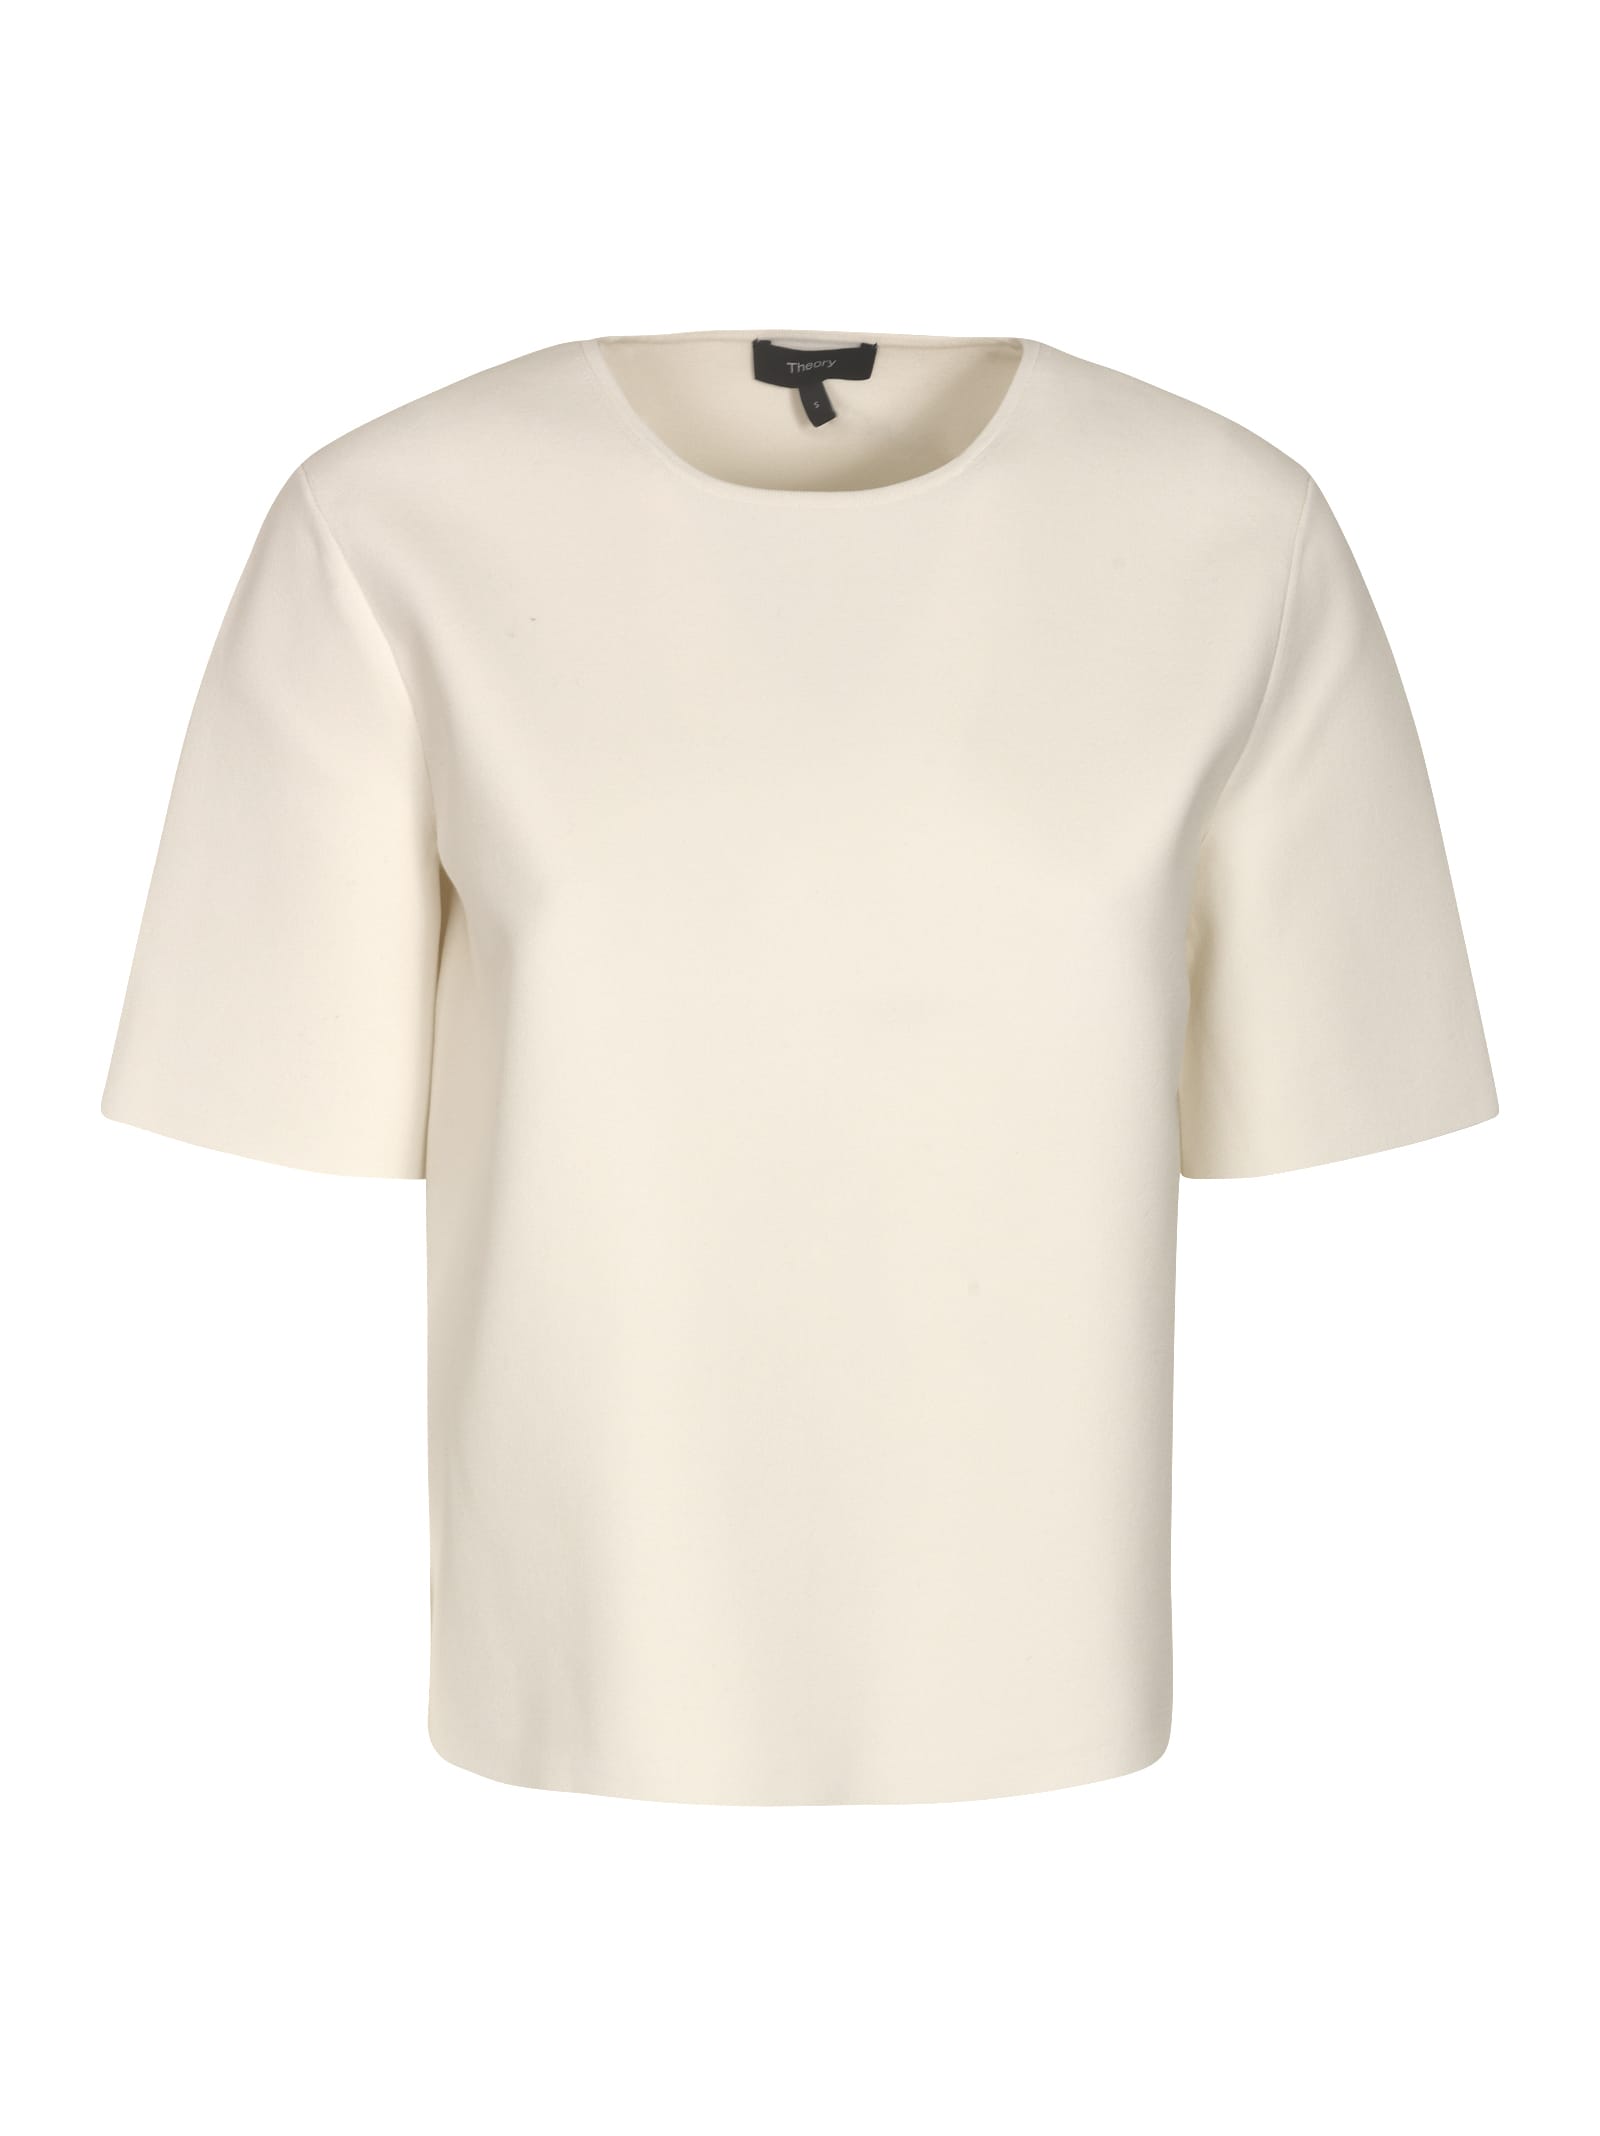 Theory Round Neck Plain Top In White